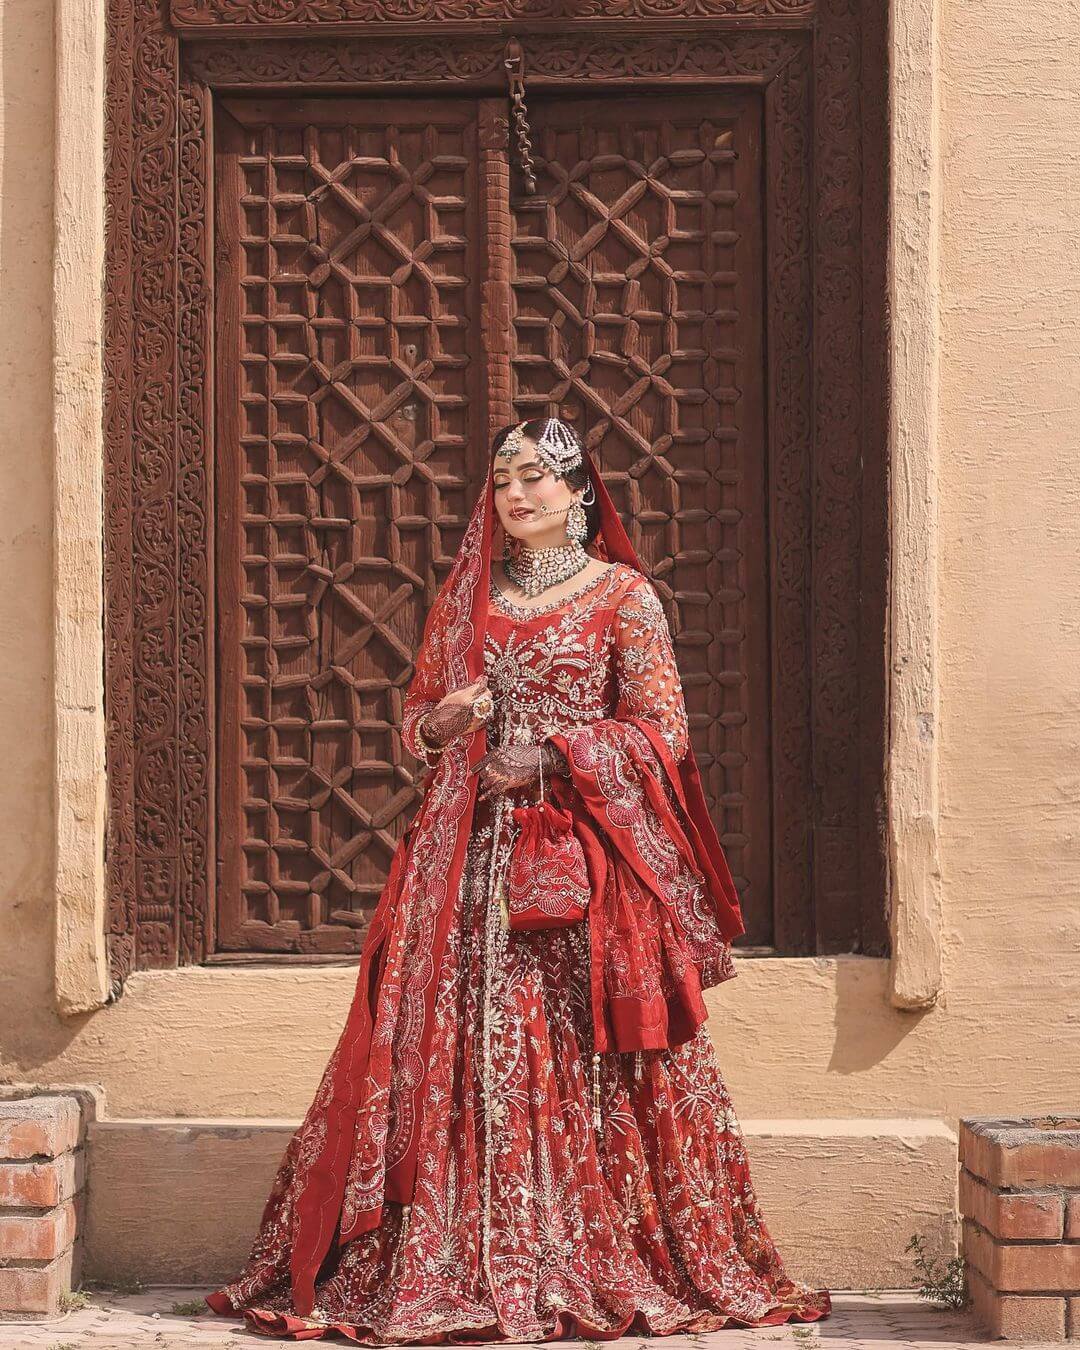 A Stunning, Smart Look: Red Pishwas with Silver Embroidery and a Gold-Embellished Lehenga